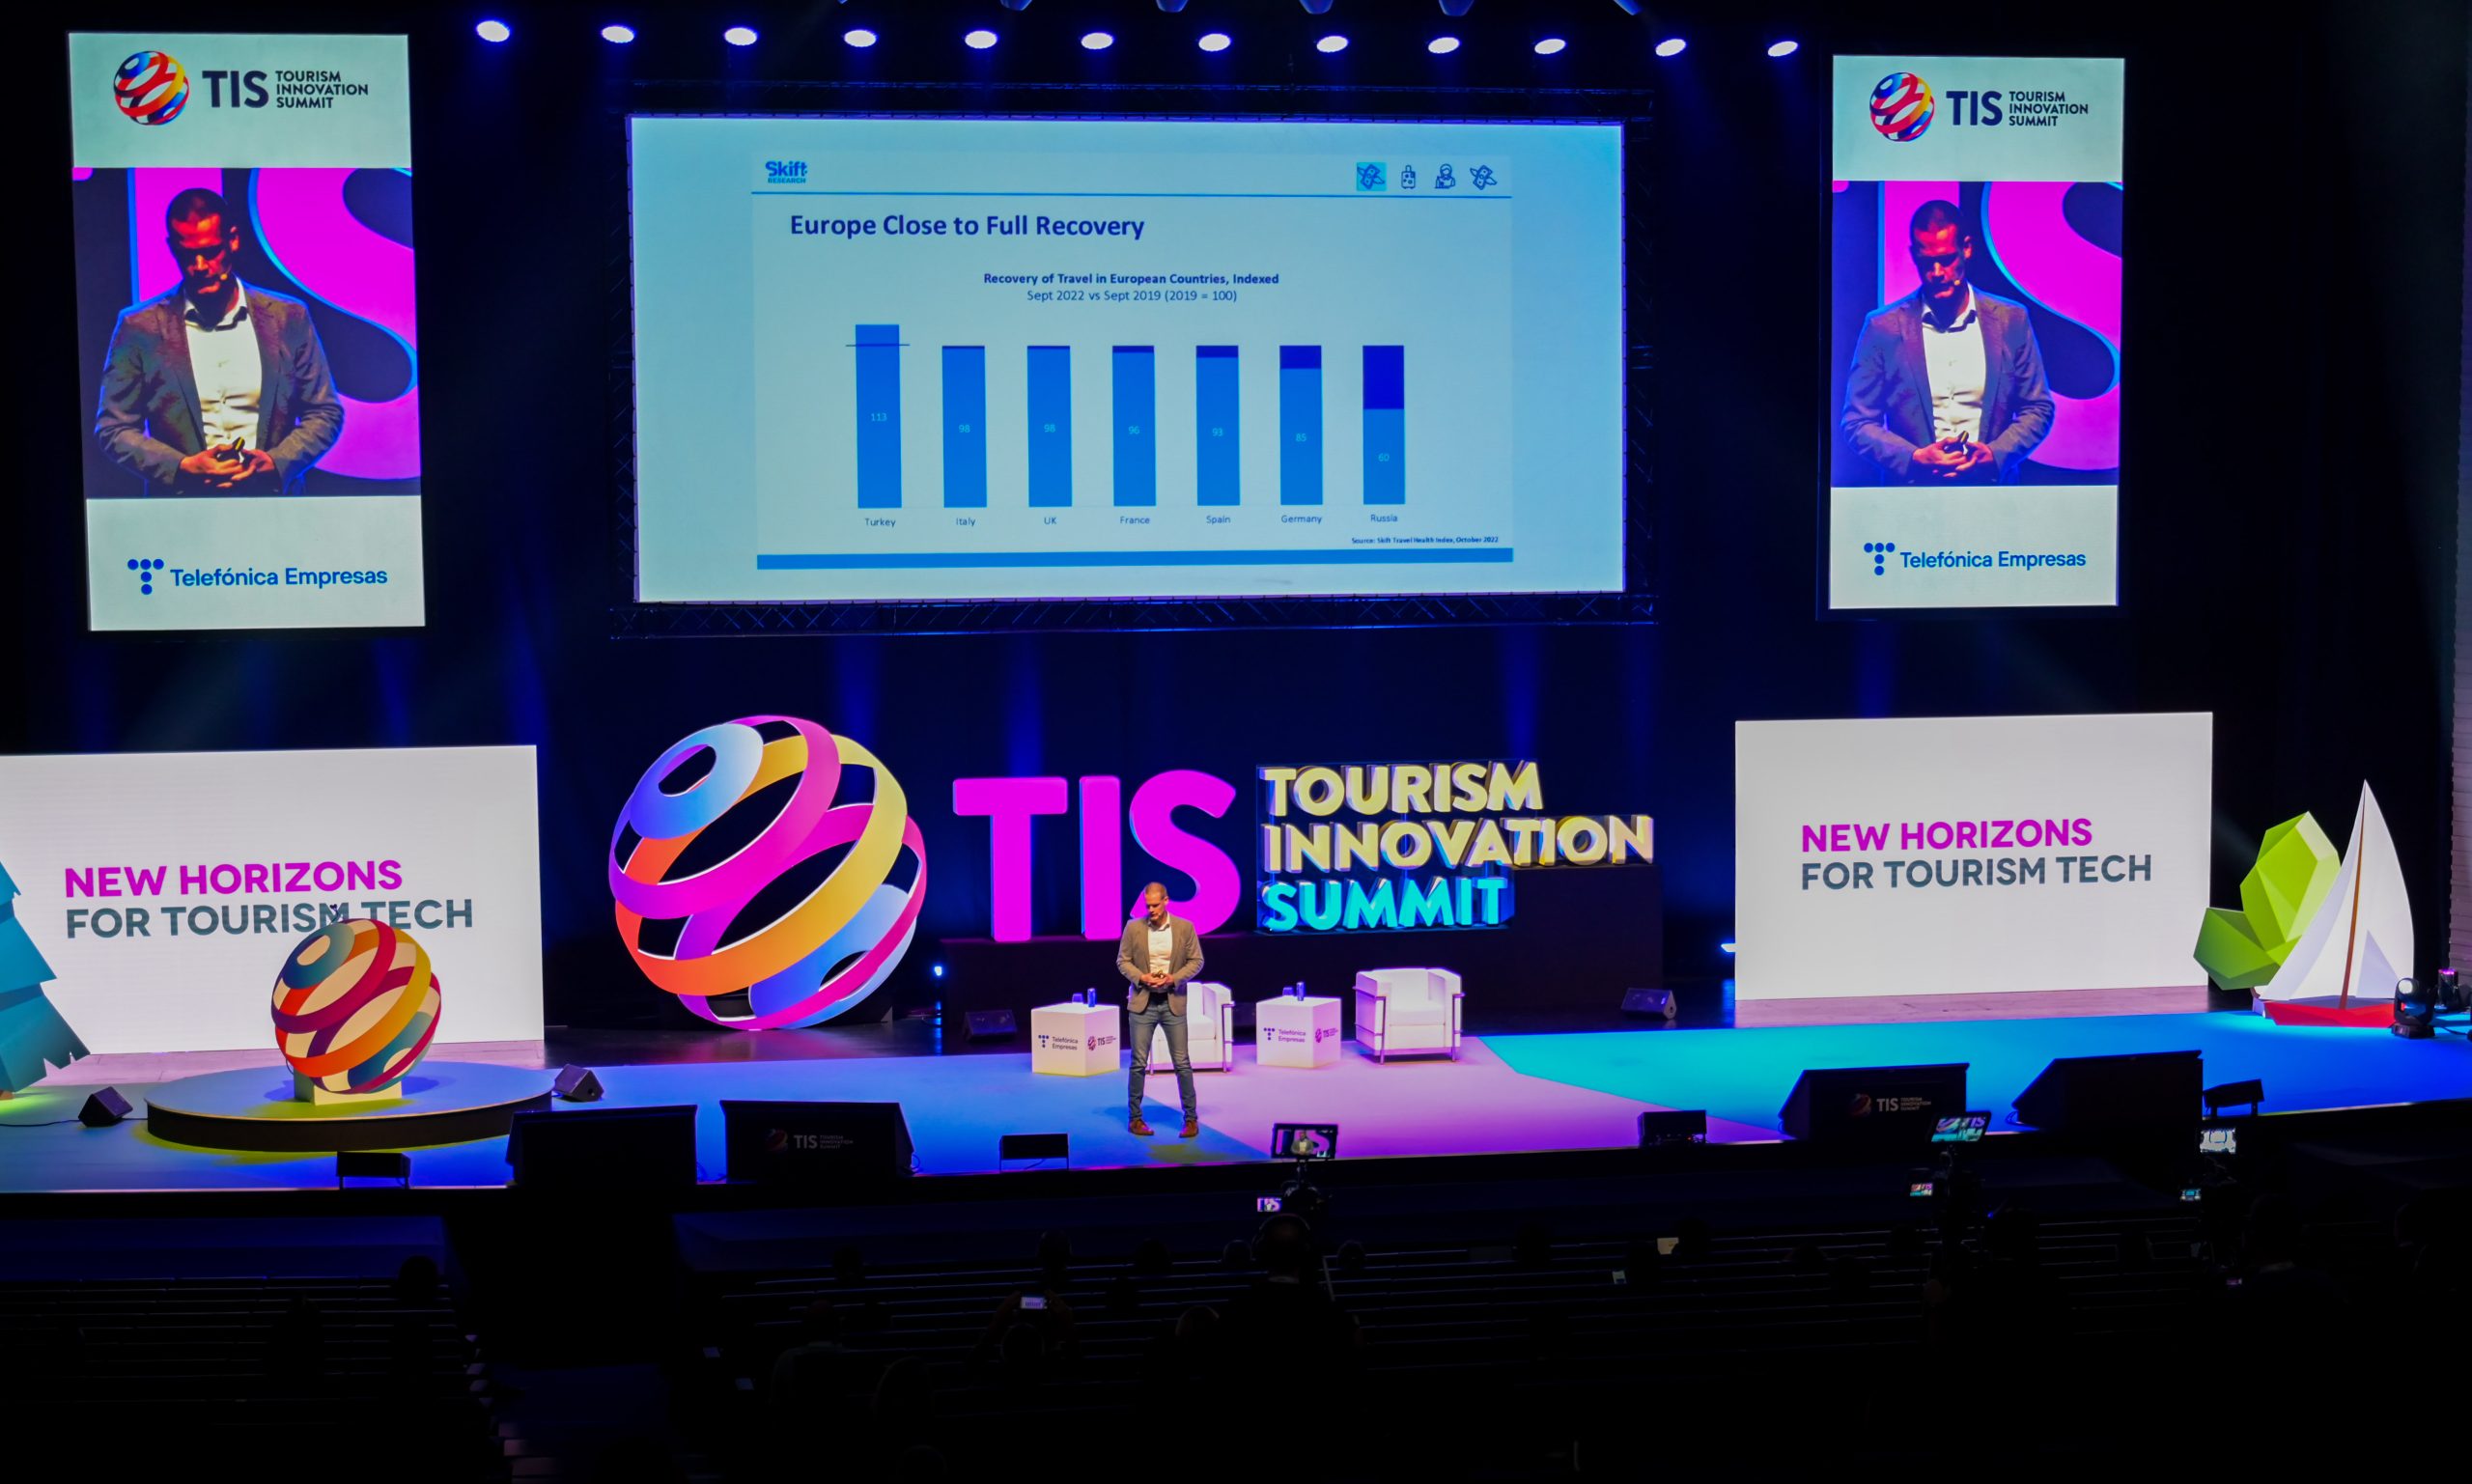 TIS - Tourism Innovation Summit reveals travel trends for the coming years: social media, sustainability and frictionless experiences